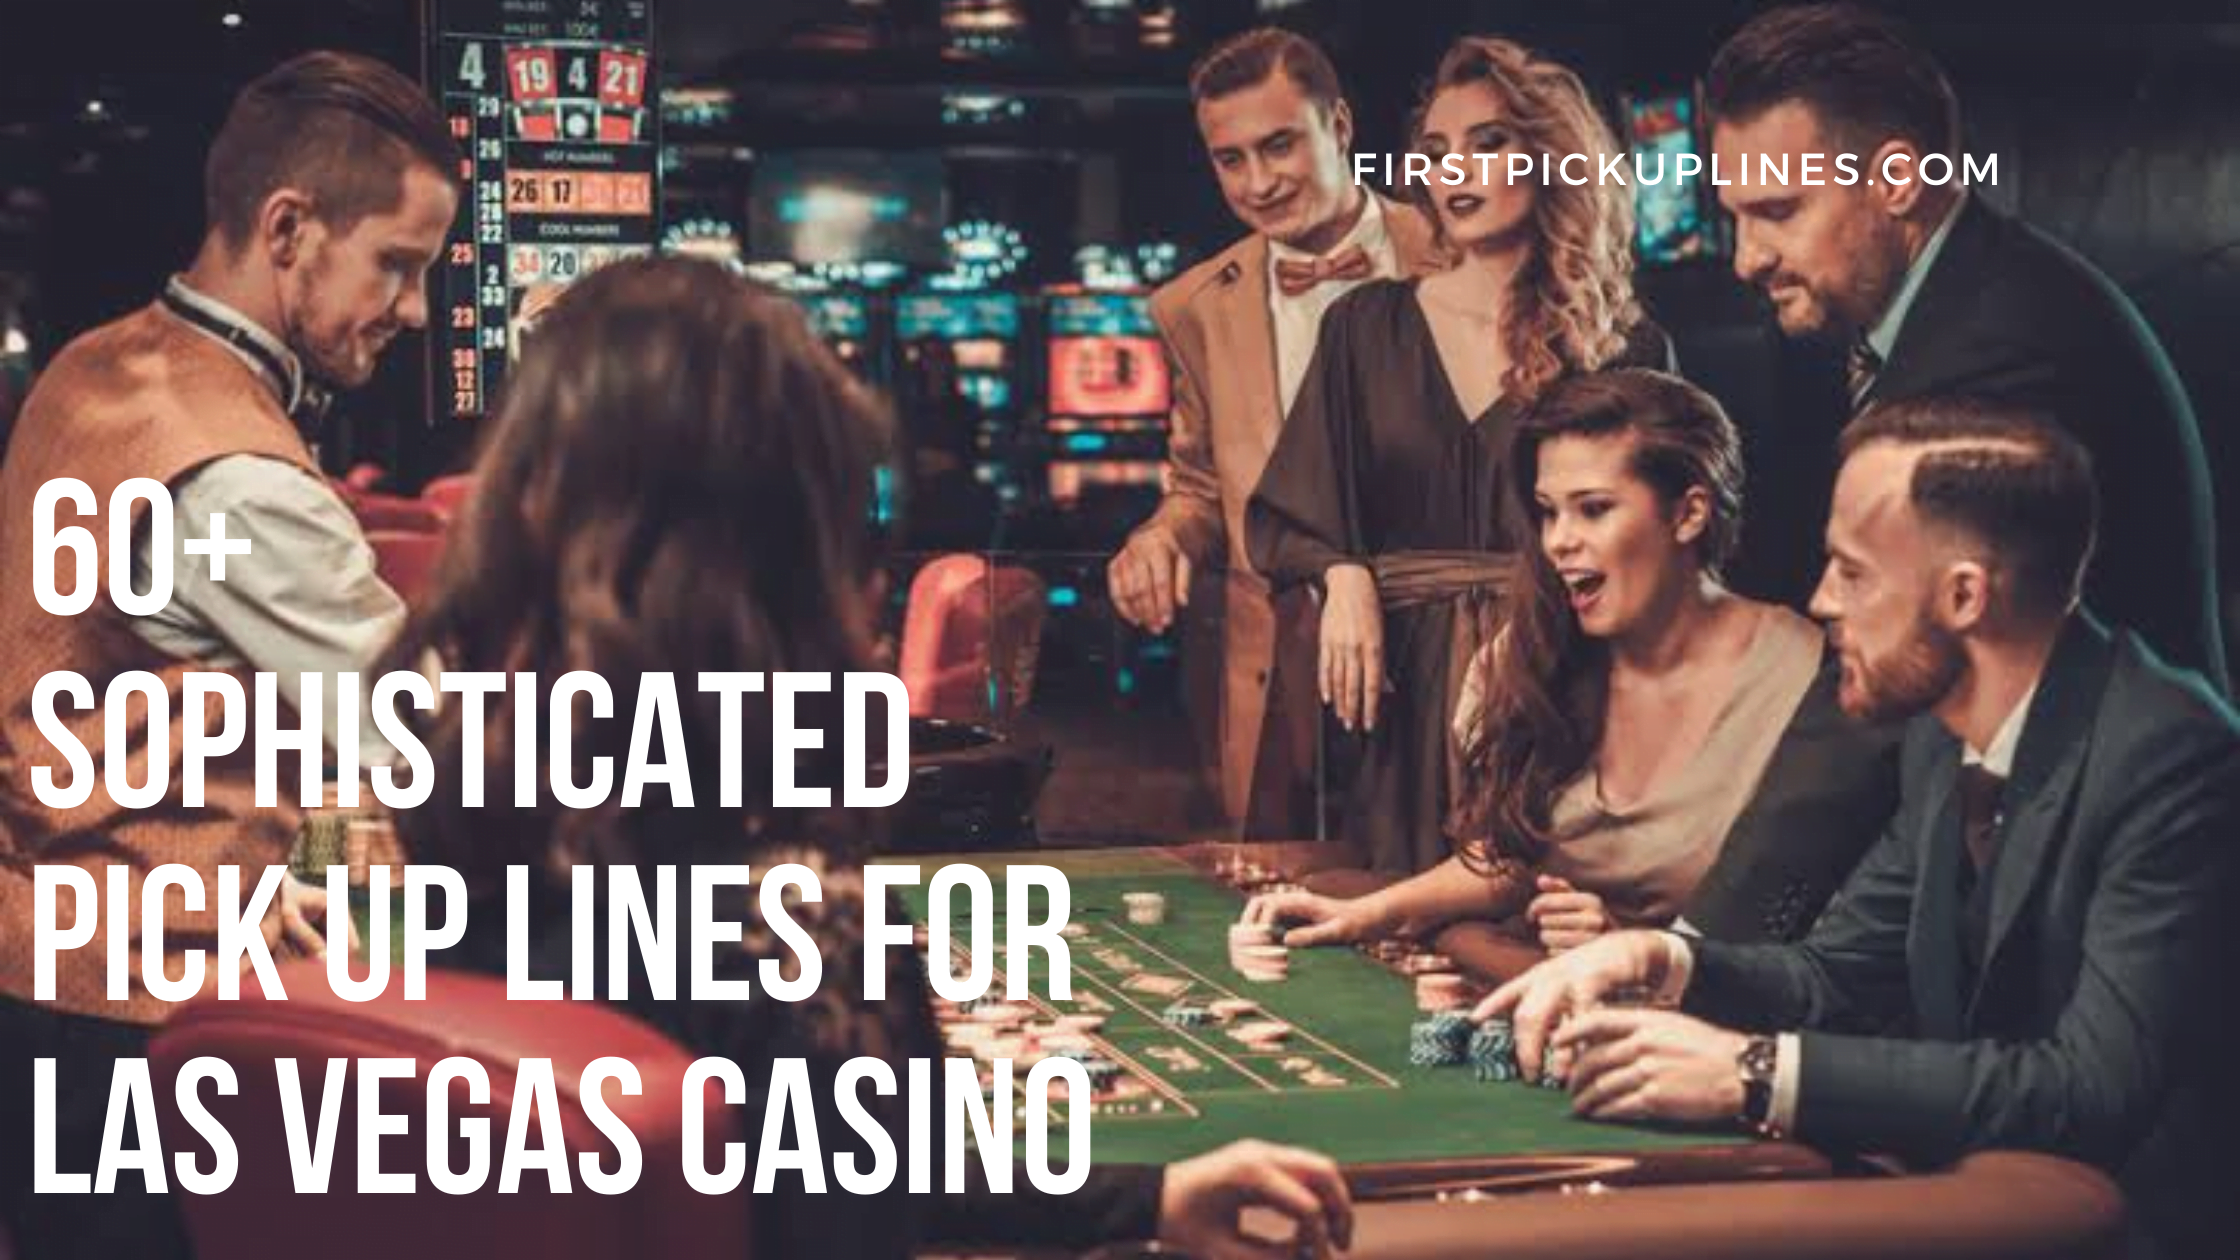 60 Sophisticated Pick Up Lines For Las Vegas Casino